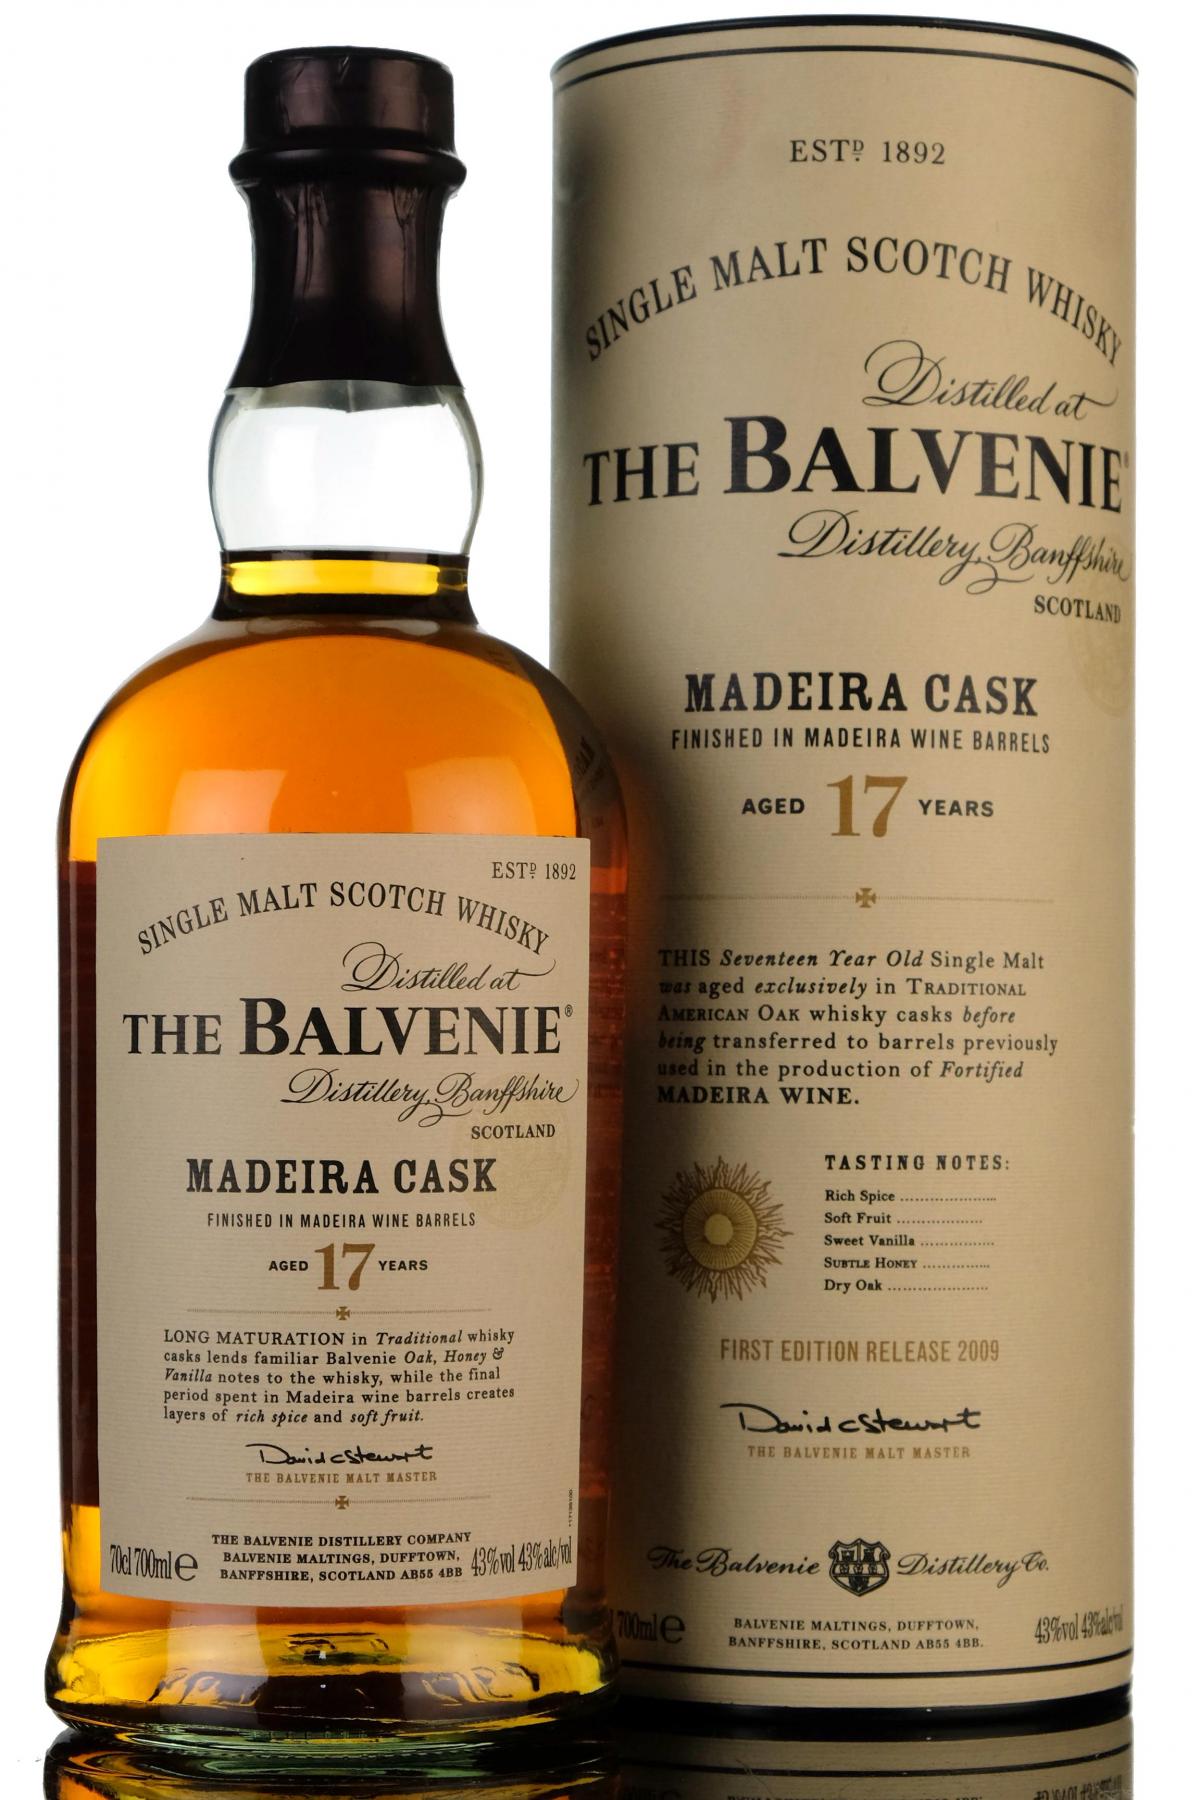 Balvenie 17 Year Old - Madeira Cask - 1st Edition - 2009 Release